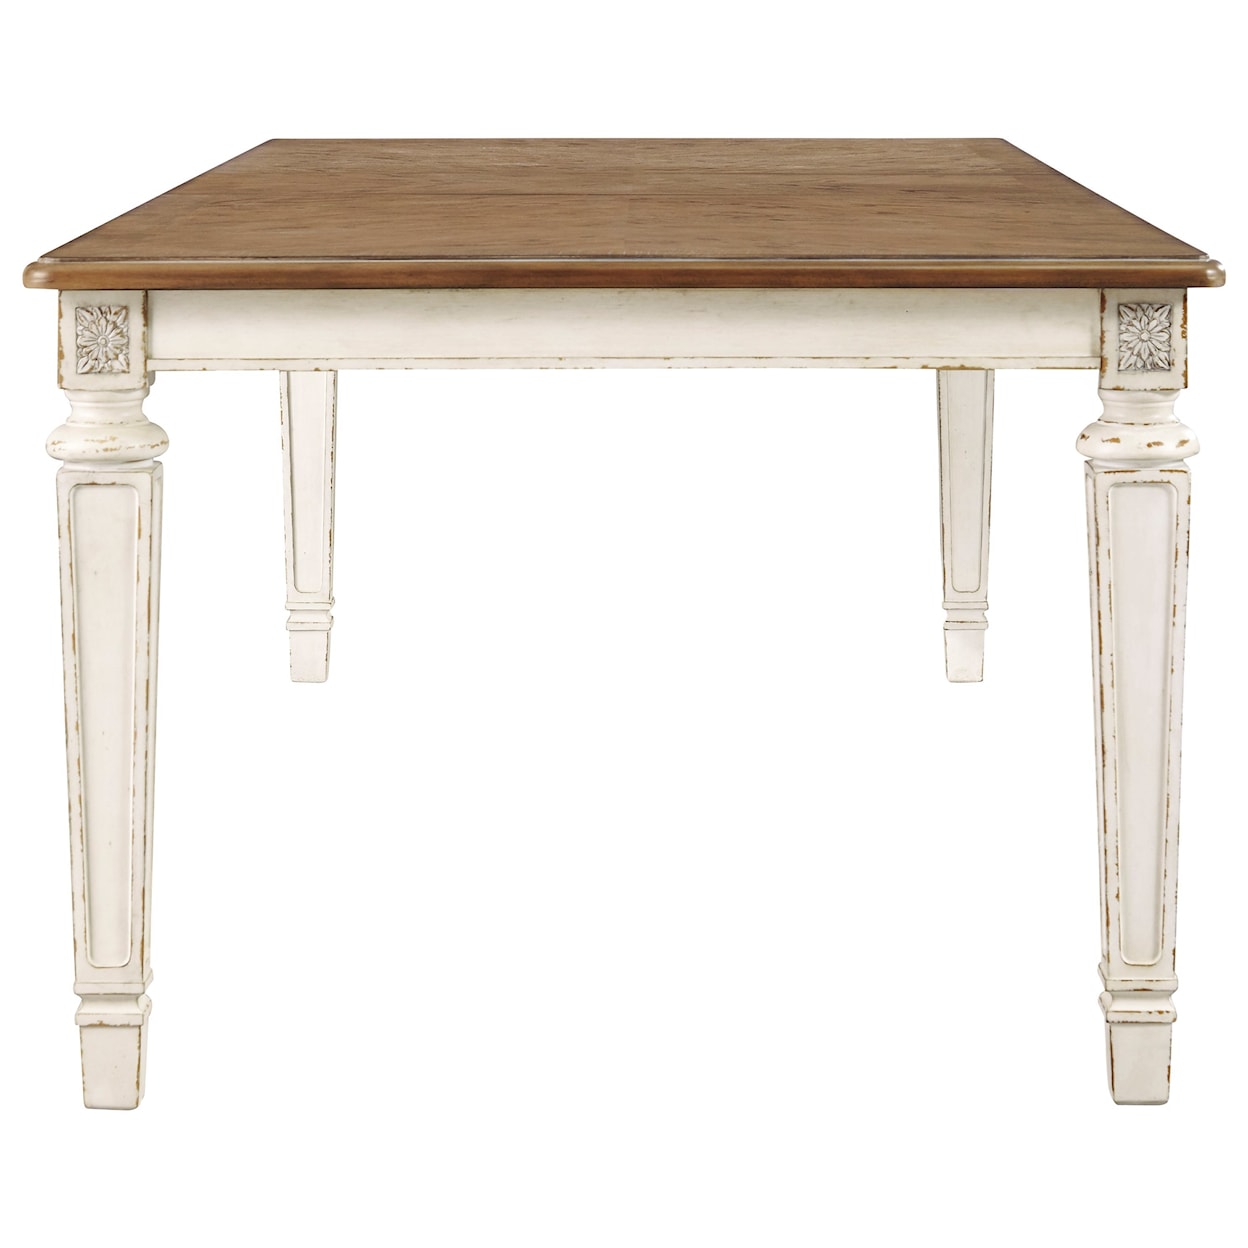 Signature Design by Ashley Realyn Rectangular Dining Room Extension Table